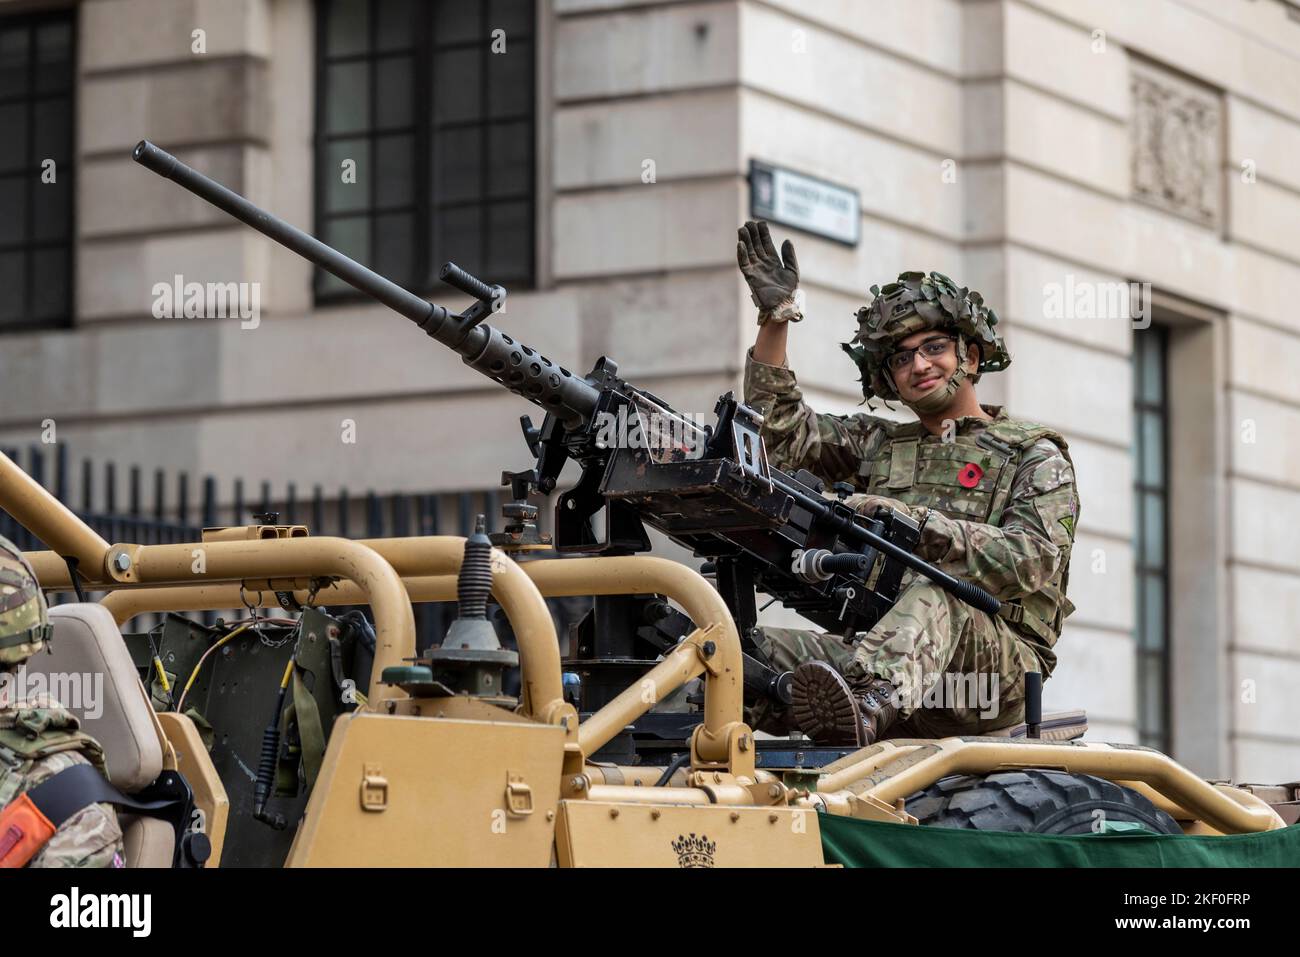 The Royal Yeomanry, Army Reserve Light Cavalry regiment at the Lord Mayor's Show parade in the City of London, UK. Gunner on a Jackal vehicle Stock Photo